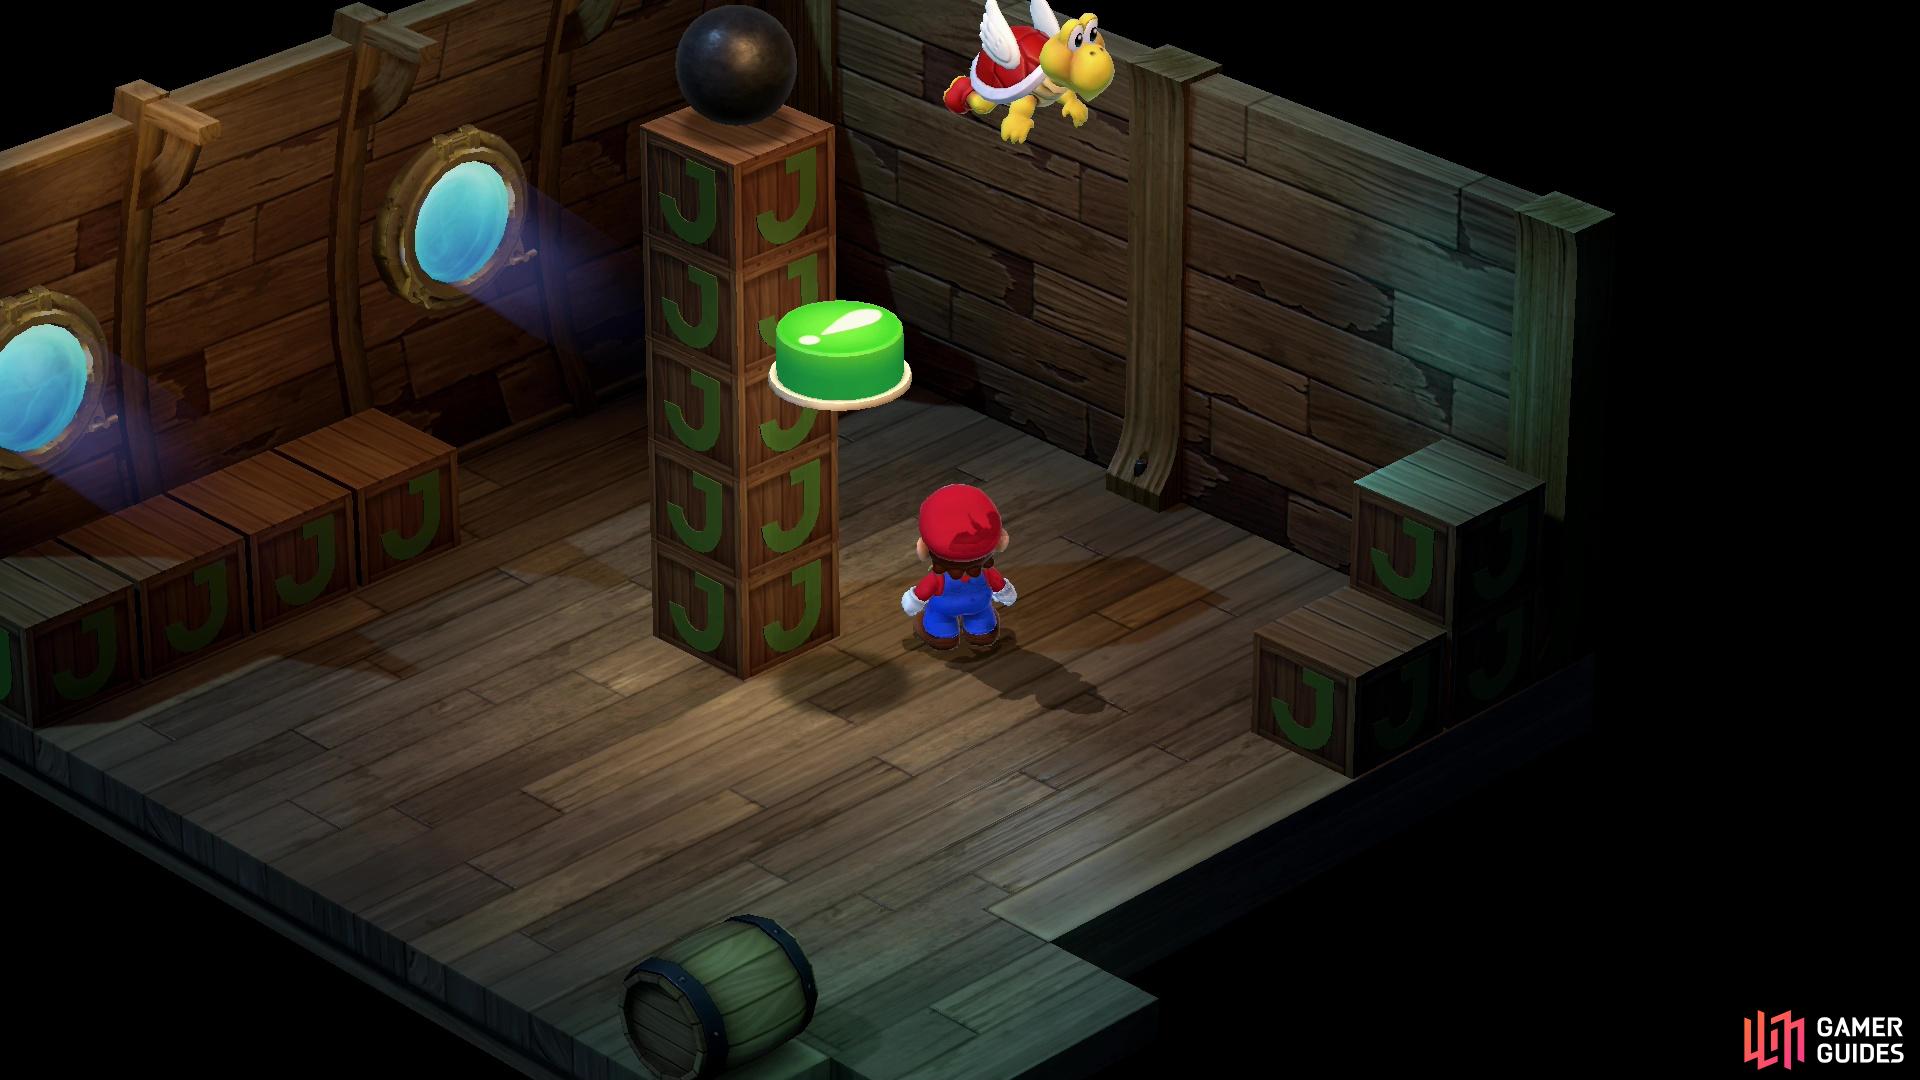 The first puzzle consists of a cannonball on some crates, a Koopa Troopa, and a button in need of some pressing.